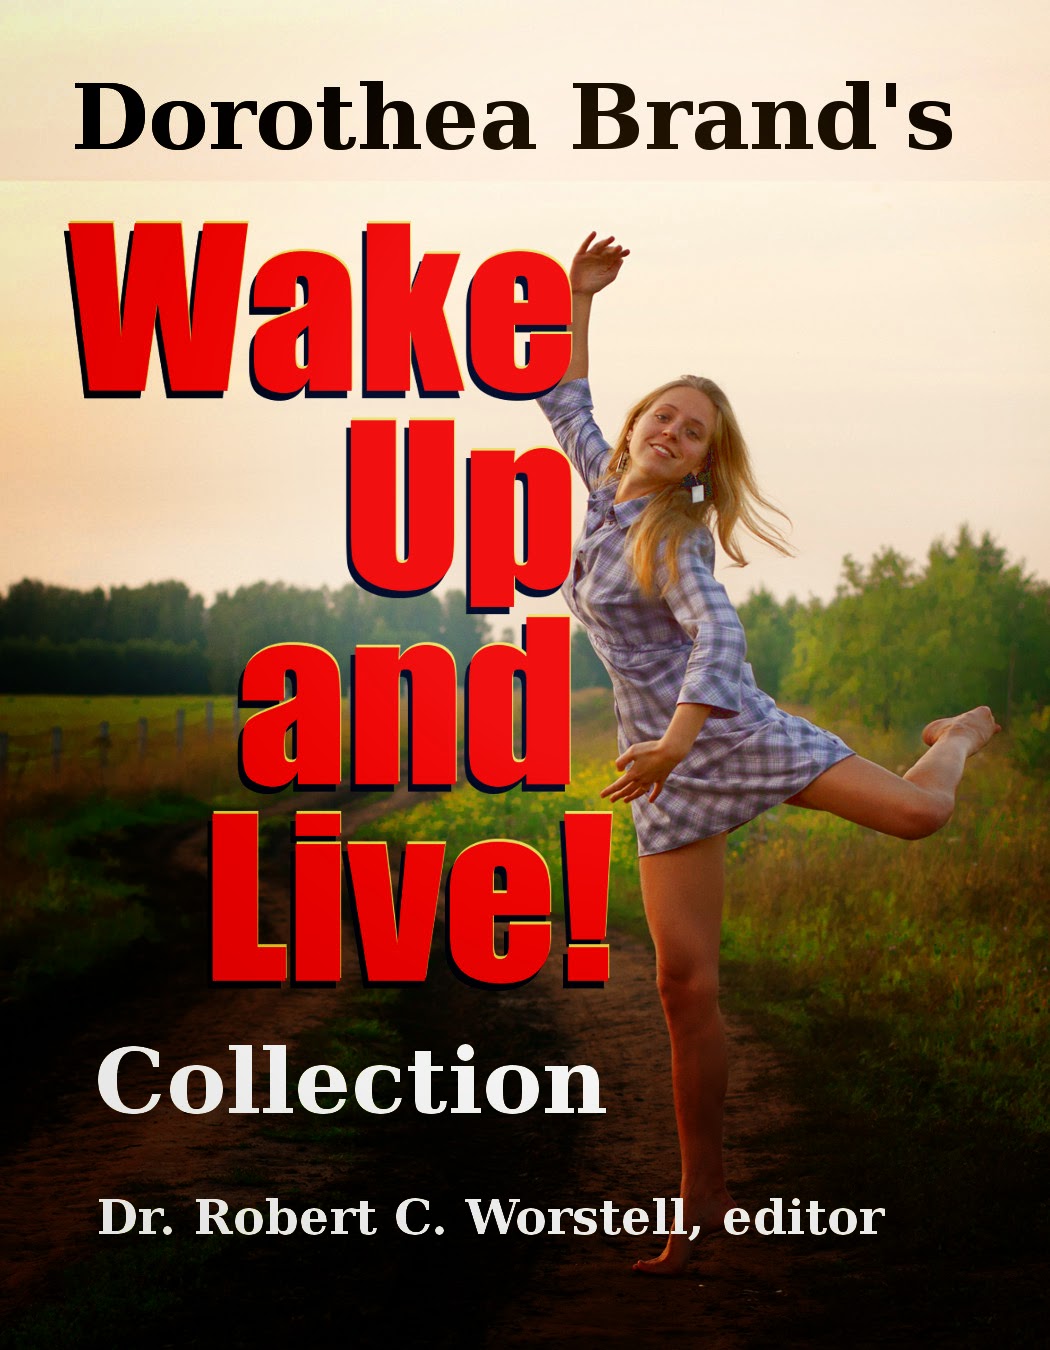 Dorothea Brande's Wake Up and Live! Collection